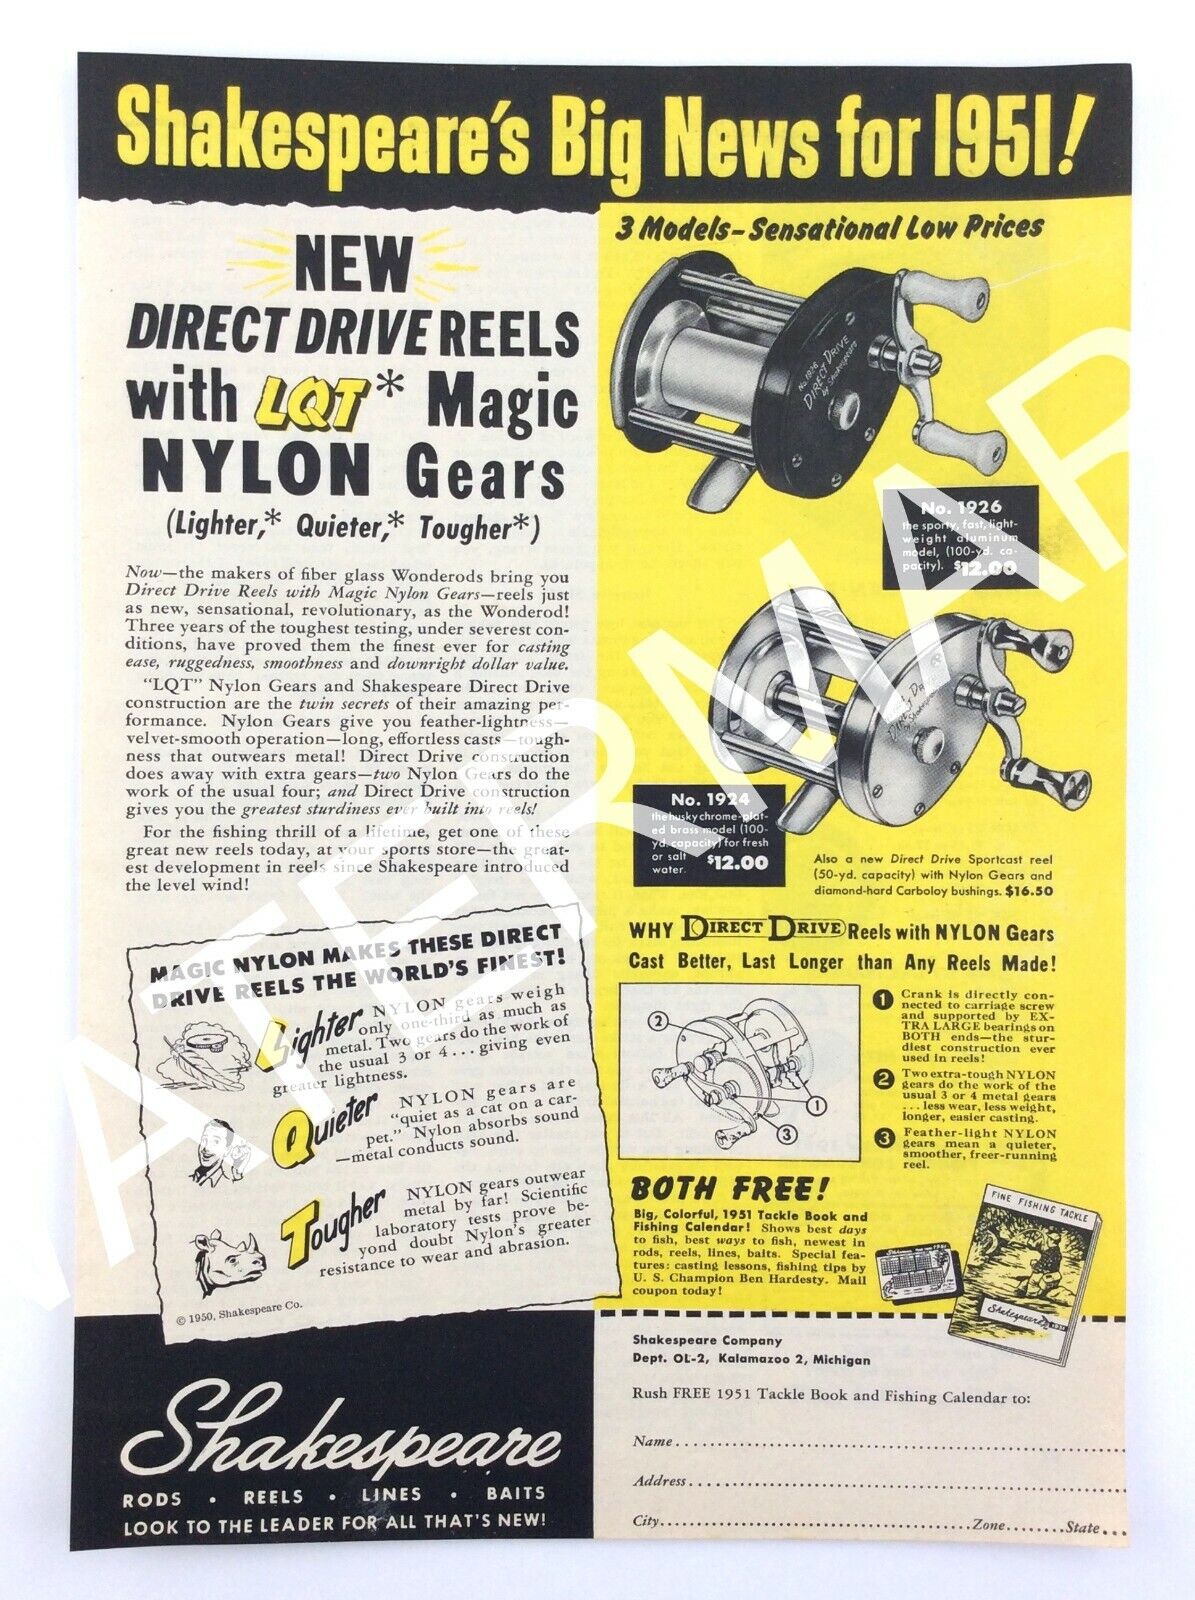 1951 Shakespeare Rods Reels New Direct Drive Lqt Magic Nylon Gears Print Ad 092a